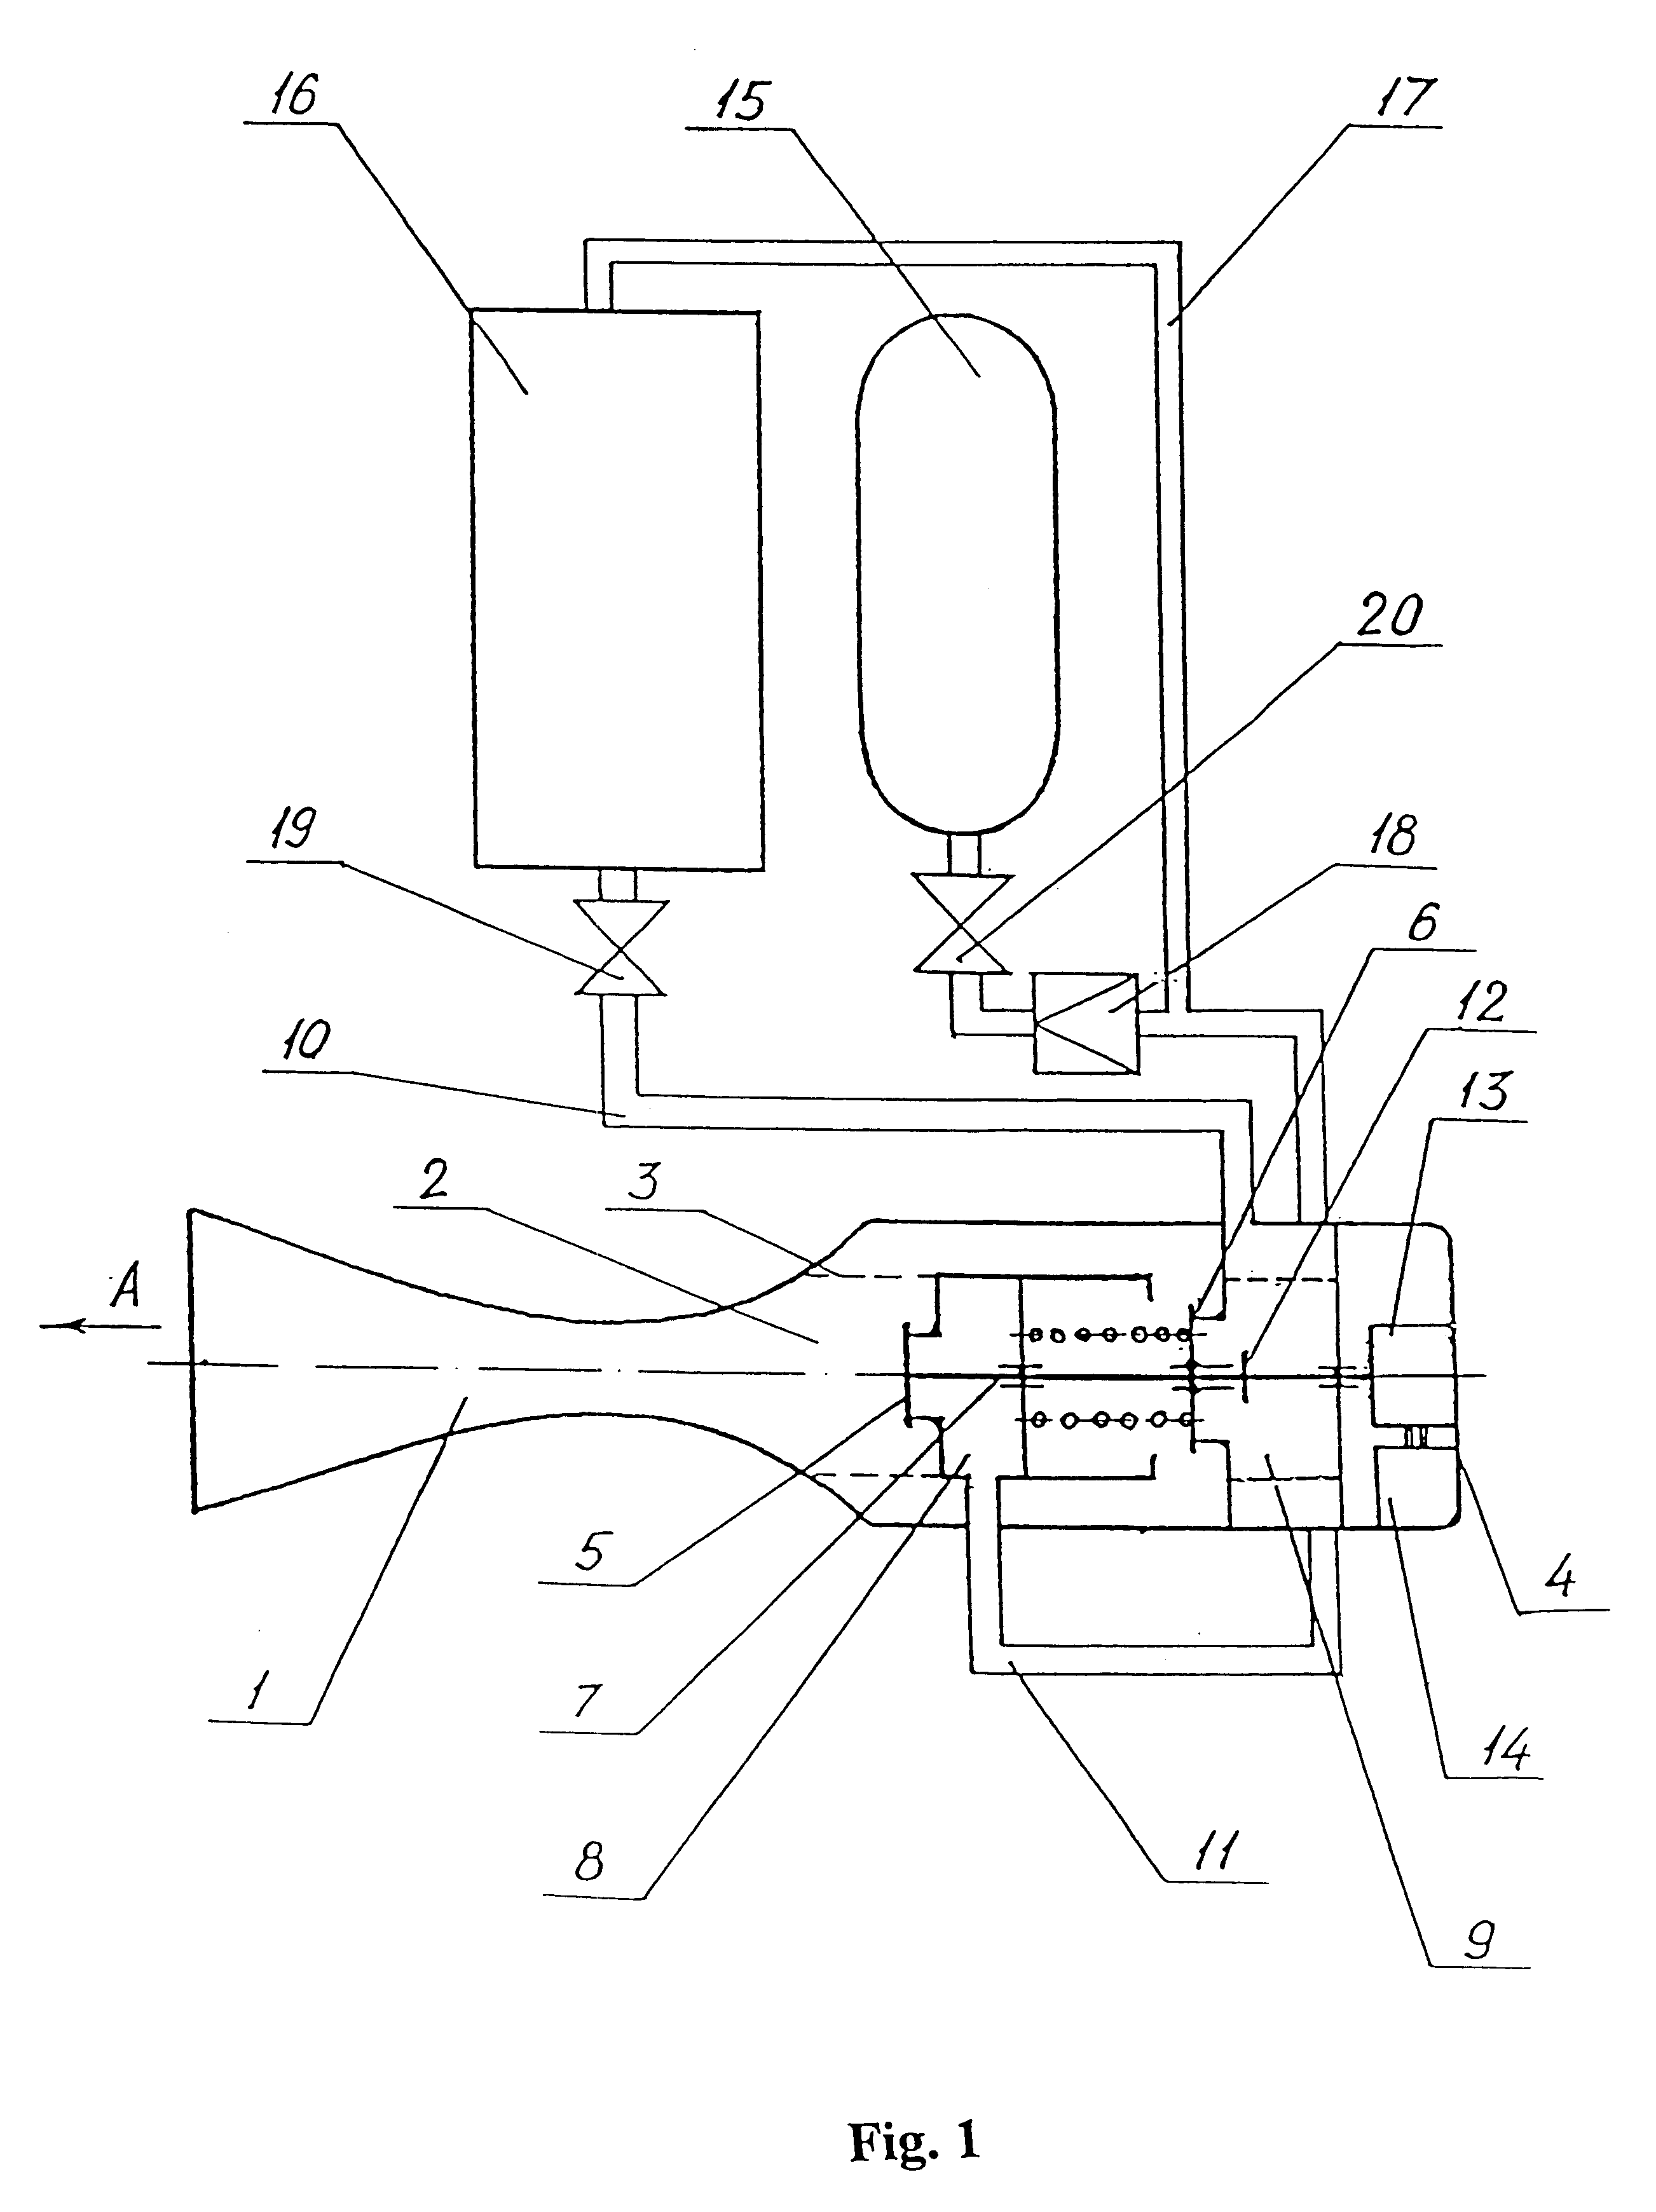 Device for generating a gas-droplet stream and valve